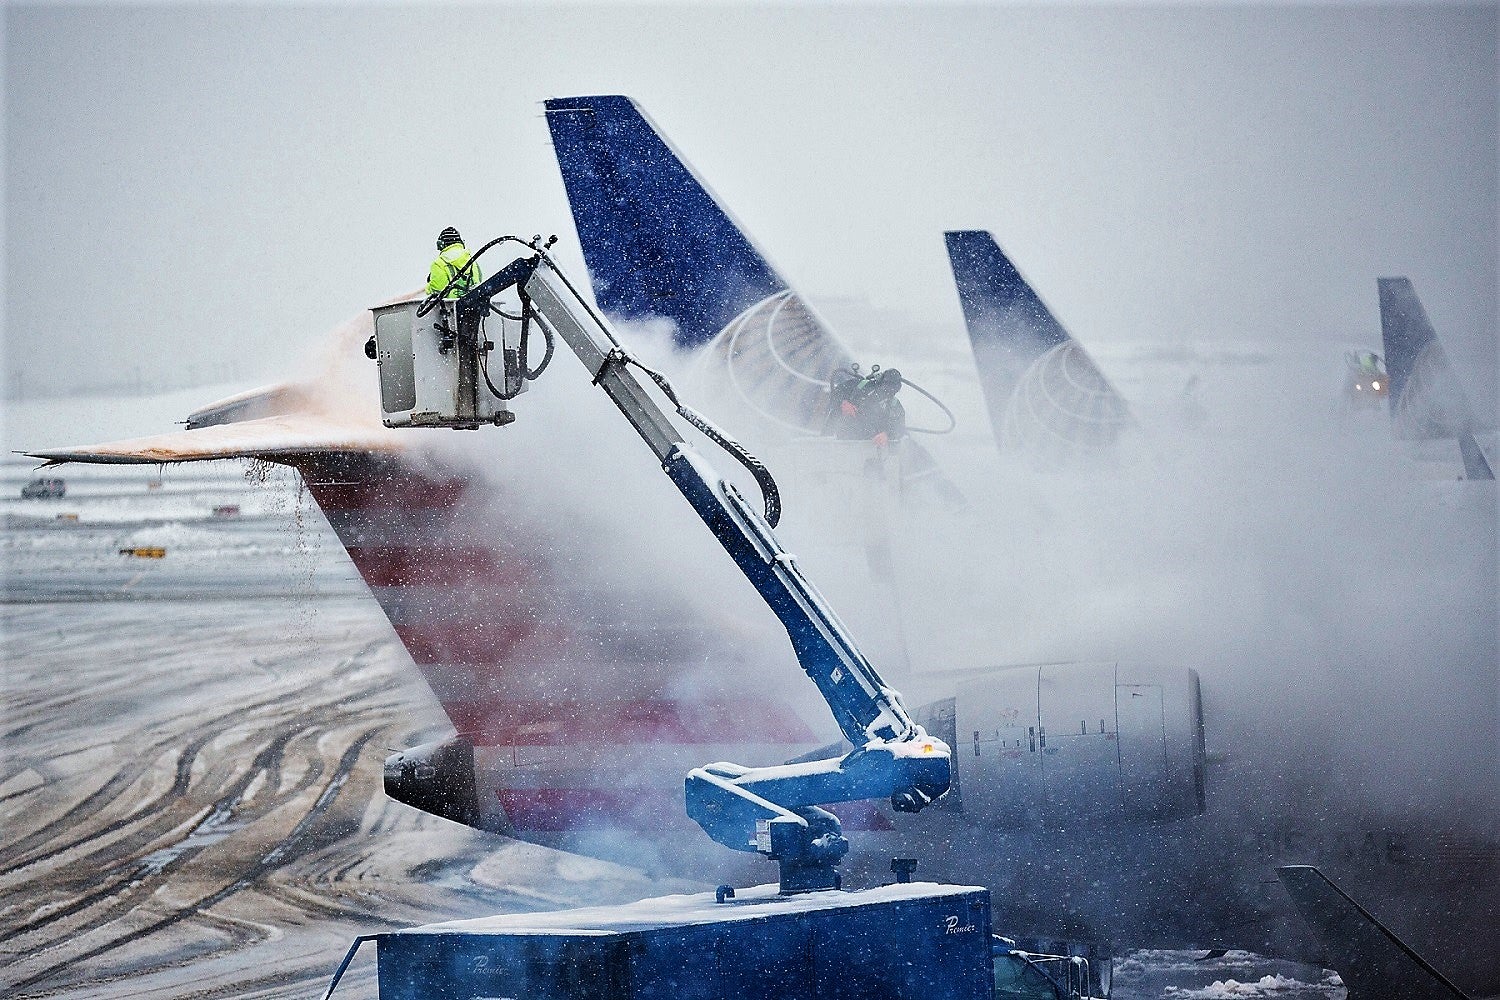 NEW YORK, NY - FEBRUARY 02: Planes are de-iced at La Guardia Airport during a winter storm on February 2, 2015 in the Queens borough of New York City. The snowstorm, which is effecting an area stretching from New York to Chicago, is disrupting travelers both on the road and in the air. (Photo by Andrew Burton/Getty Images)